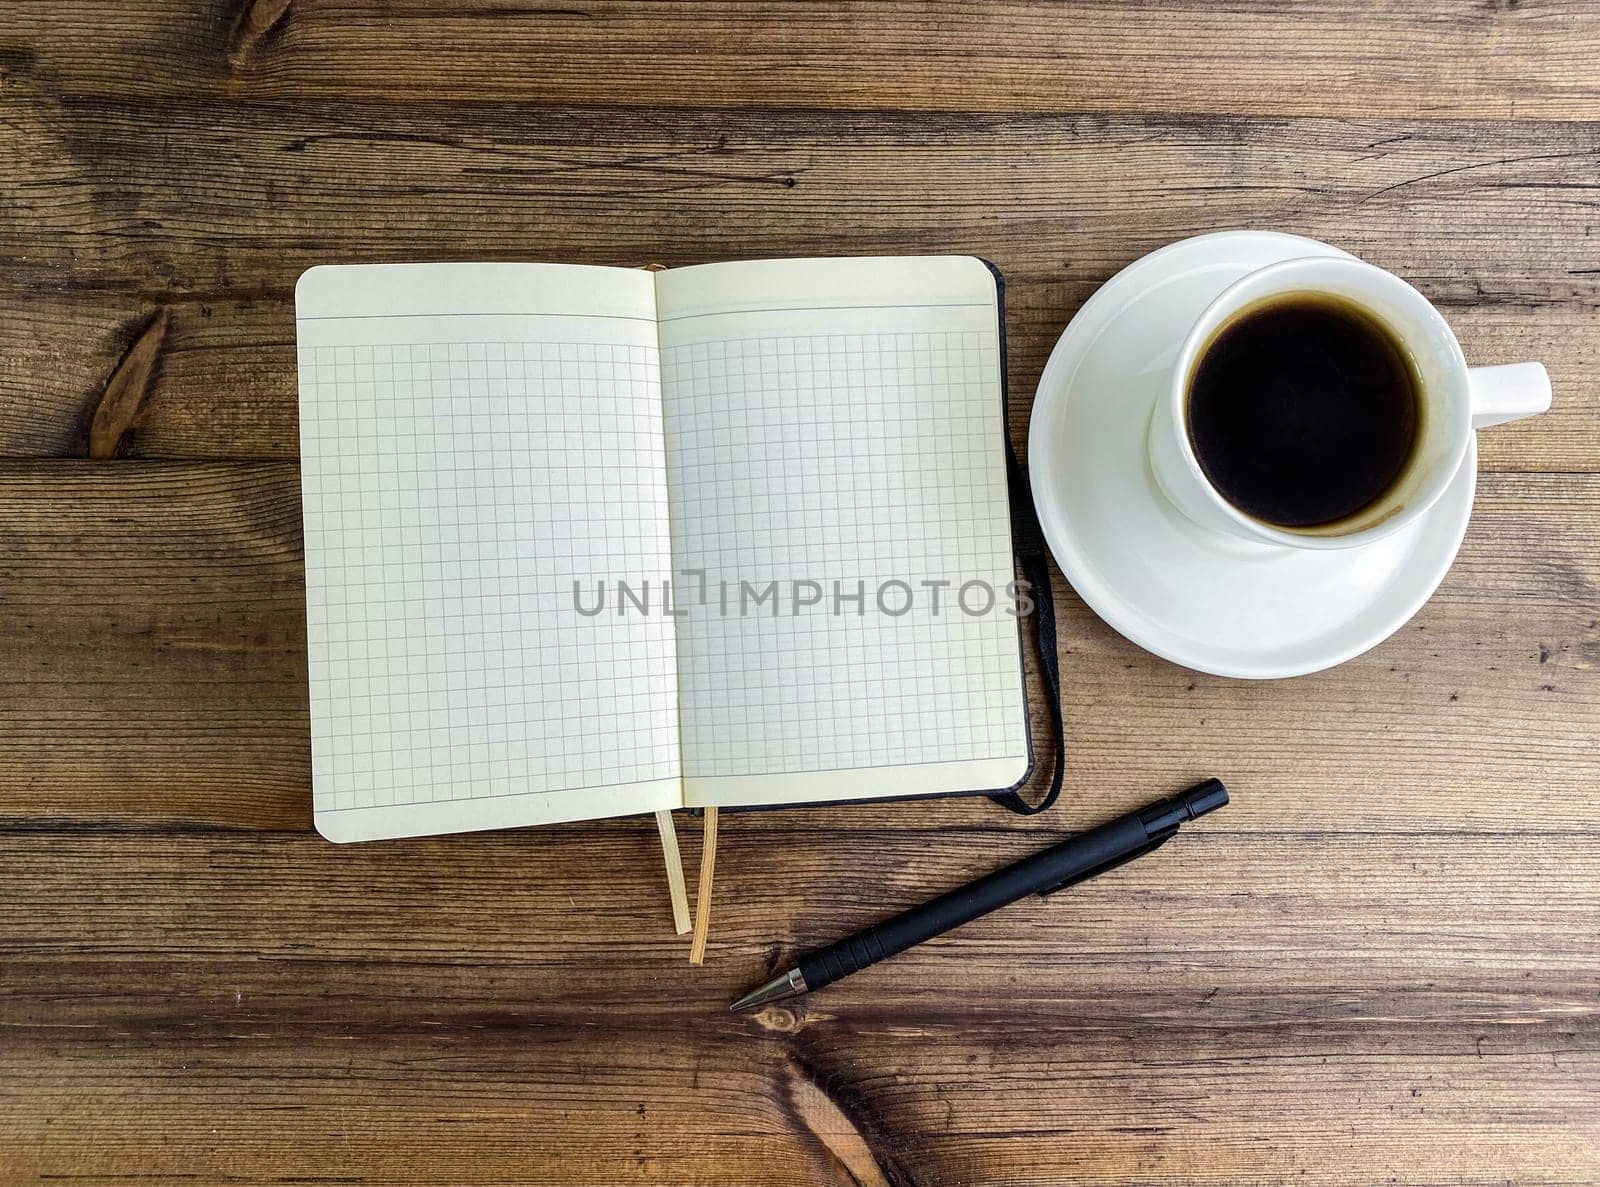 Coffee in a cup and a notebook with a pen on the table, top view. Coffee in a cup with a saucer and a notebook with a pen on a wooden table.